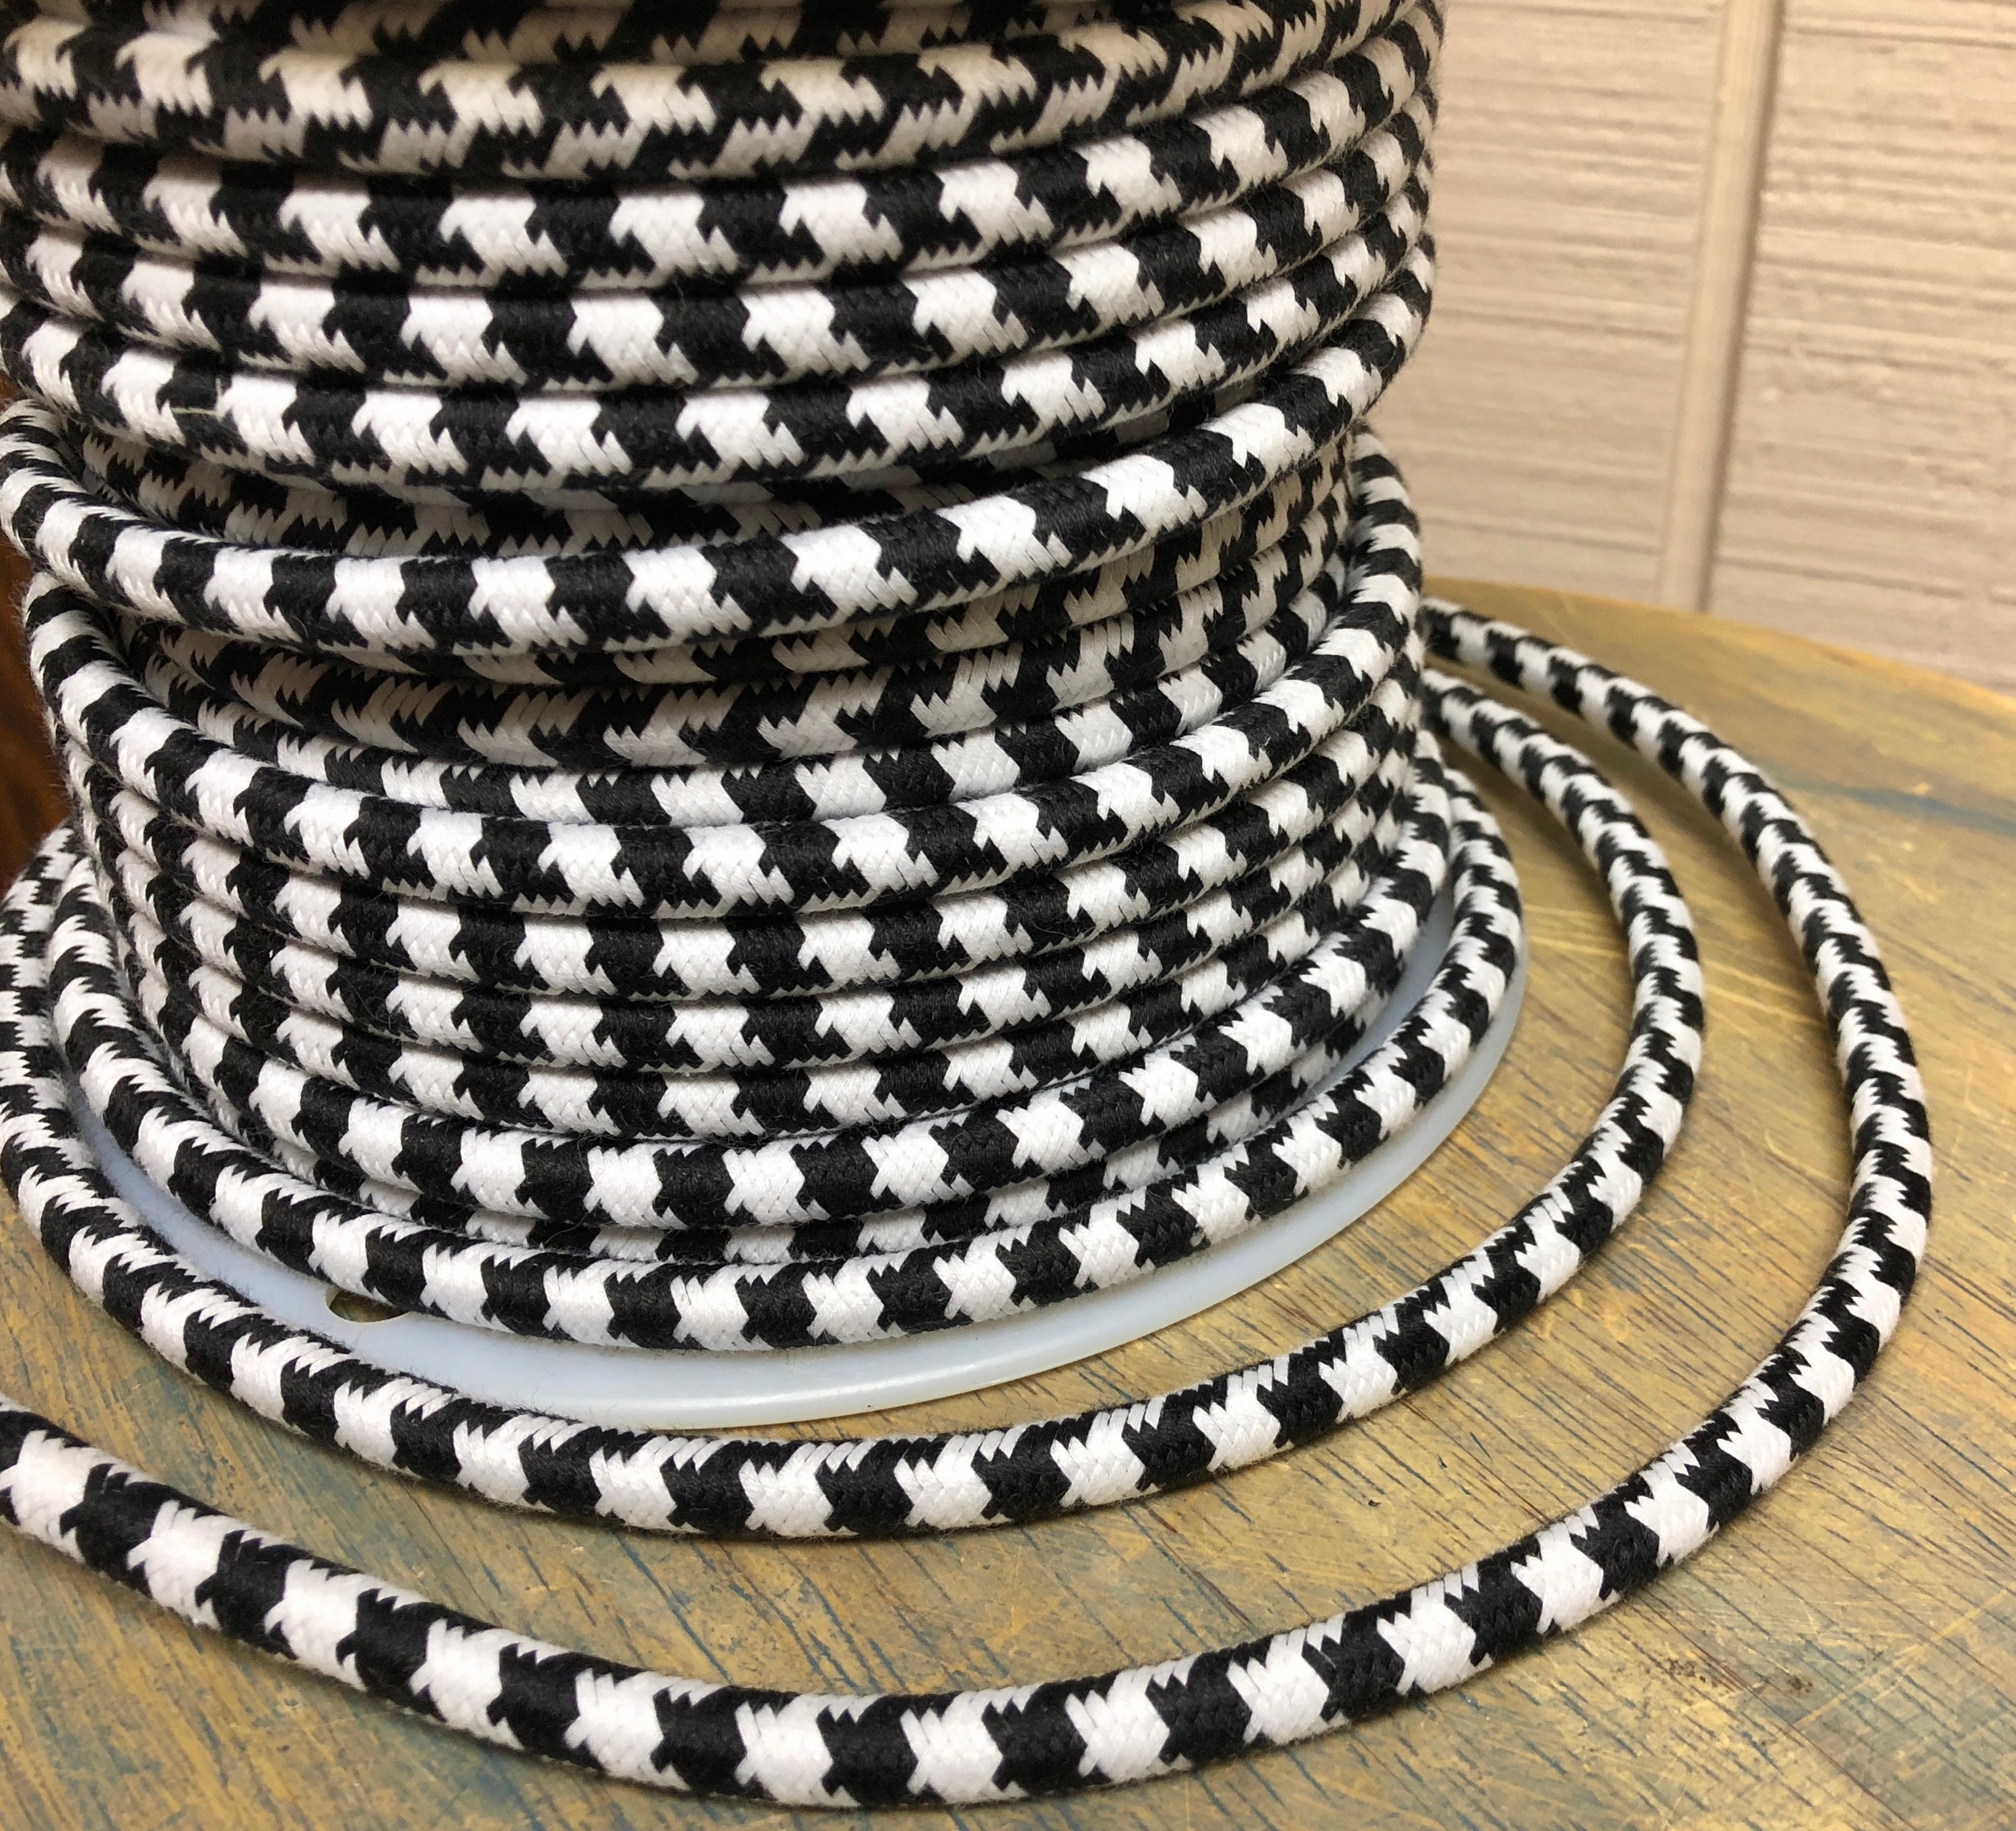 Vintage 3-Wire Twisted Cloth Covered Wire Antique Lamp Cord Mixed Black & White 